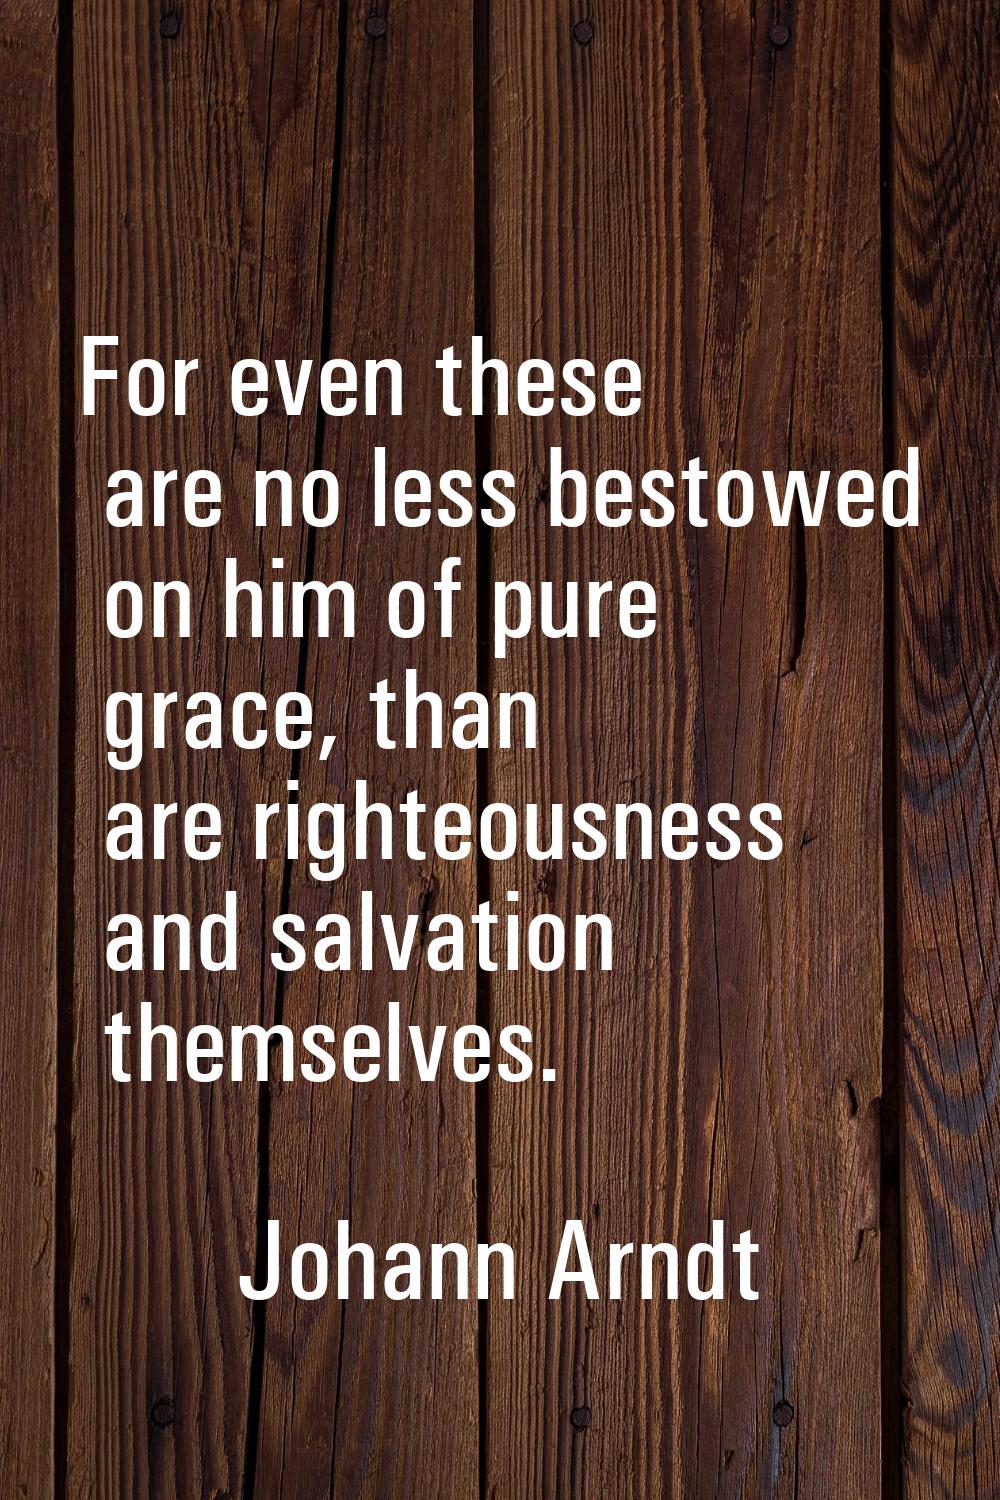 For even these are no less bestowed on him of pure grace, than are righteousness and salvation them